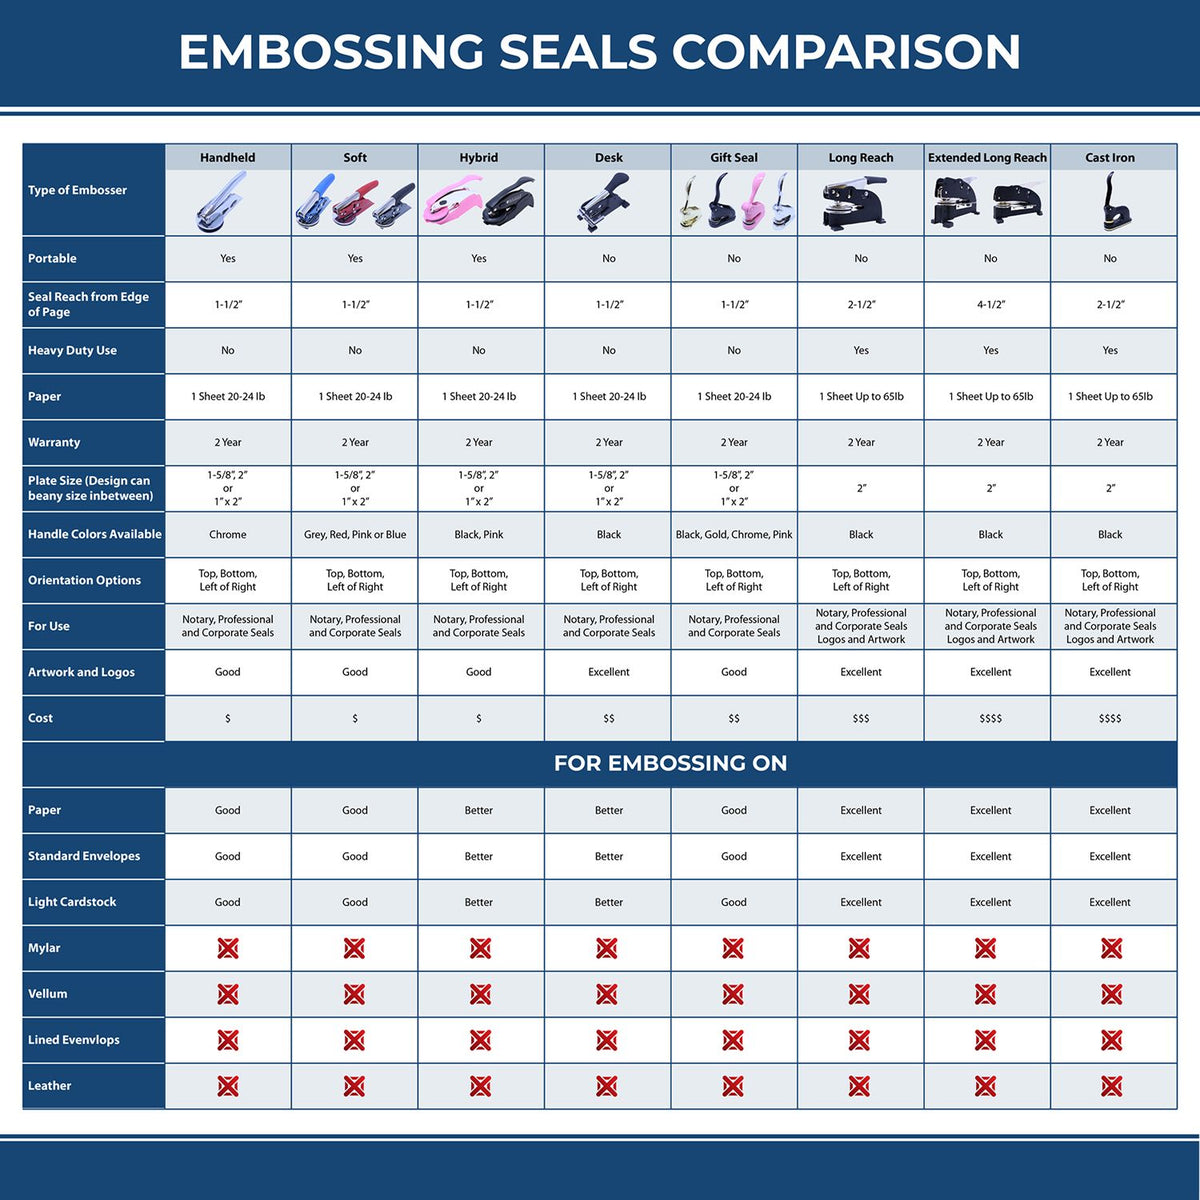 A comparison chart for the different types of mount models available for the Soft Idaho Professional Engineer Seal.